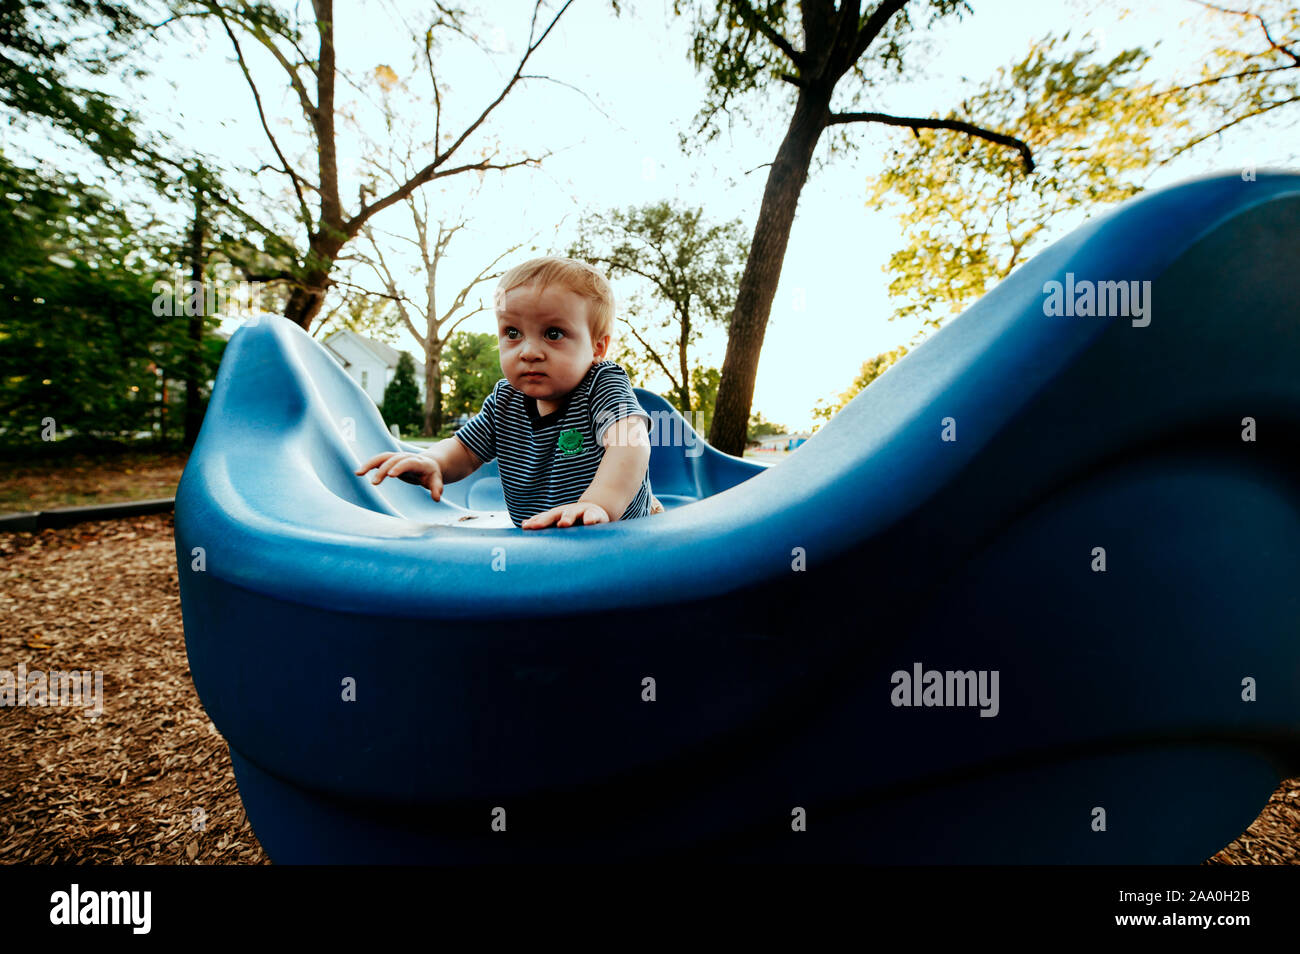 Toddler boy playing on blue playground equipment at park Stock Photo